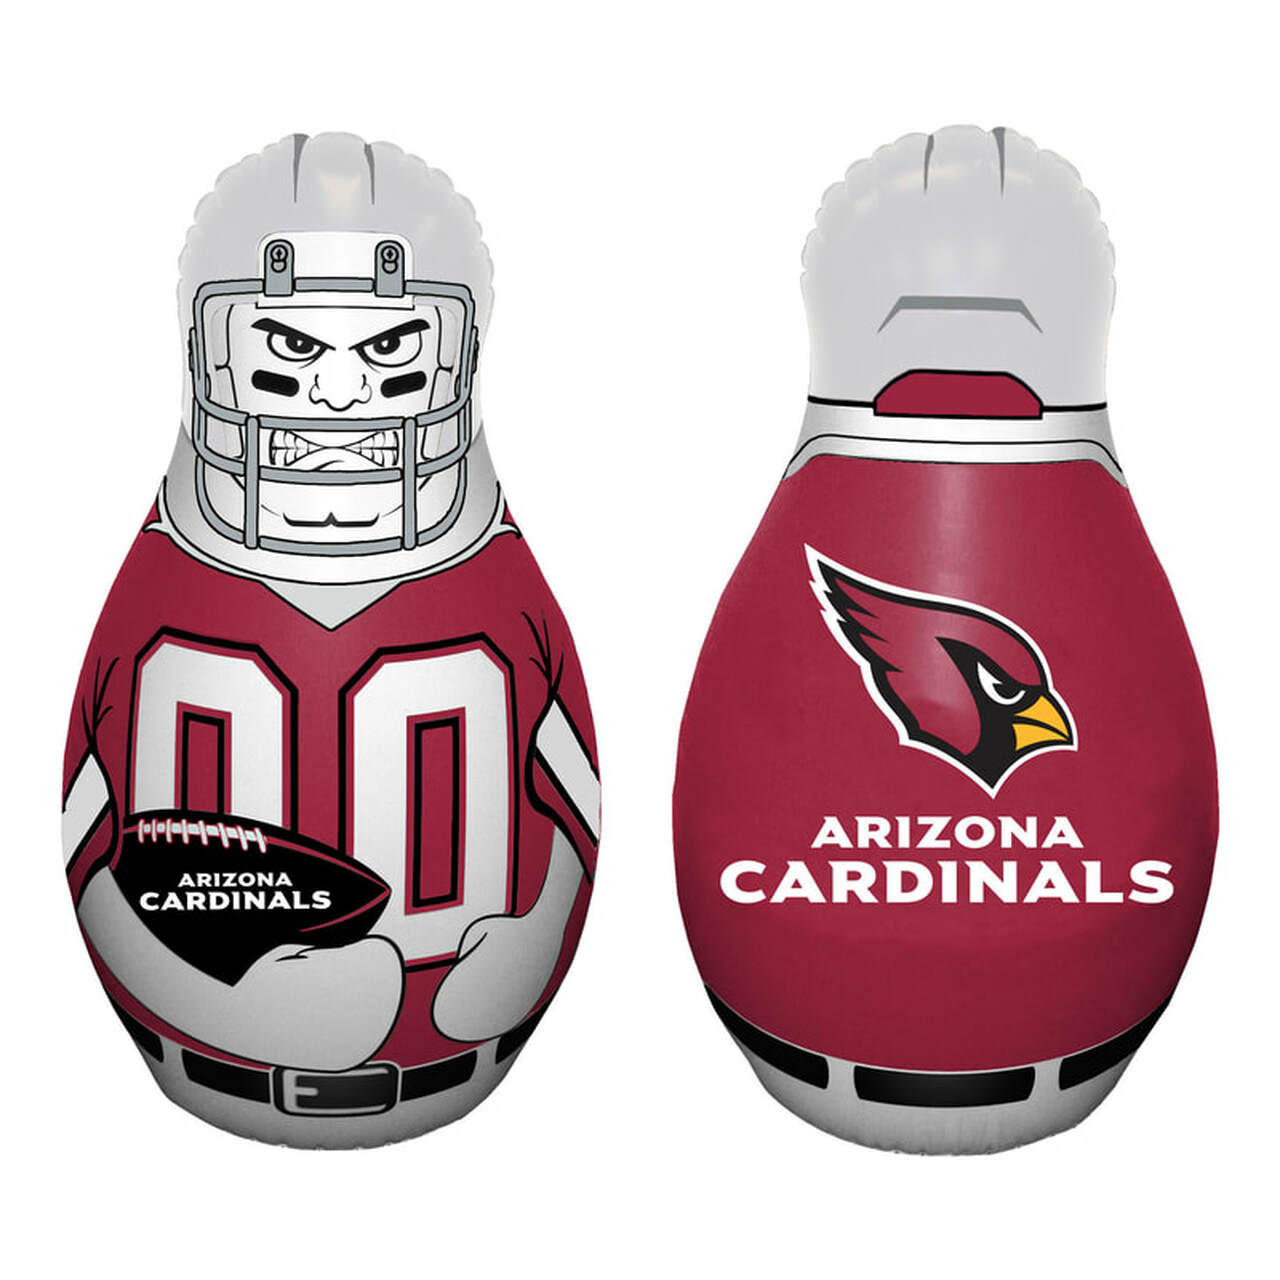 Kids inflatable toy punching bag with Arizona Cardinals football player graphics